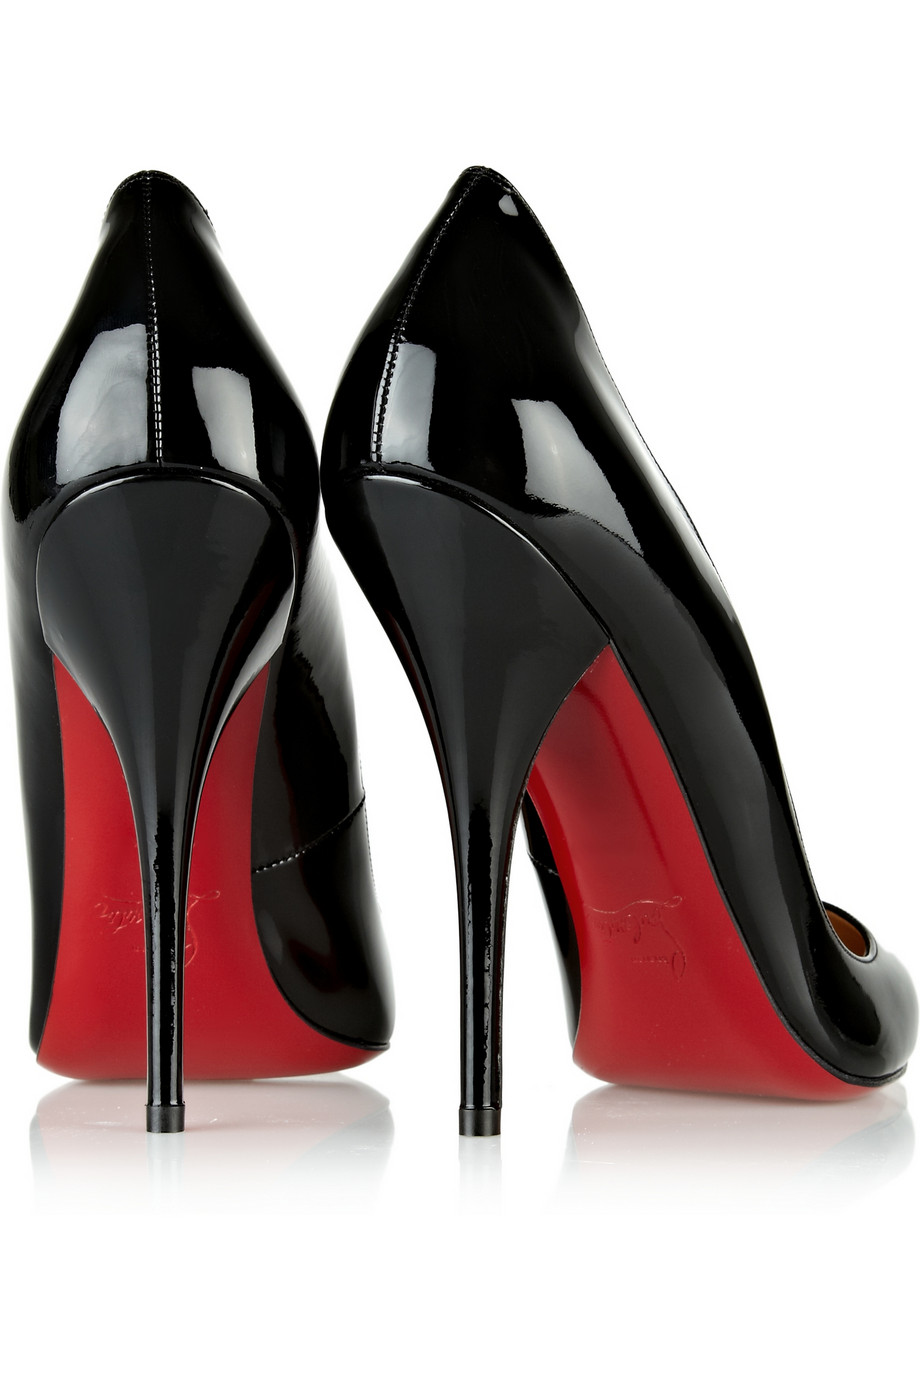 Christian Louboutin The Pigalle 120 Patent-Leather Pumps in Black - Lyst